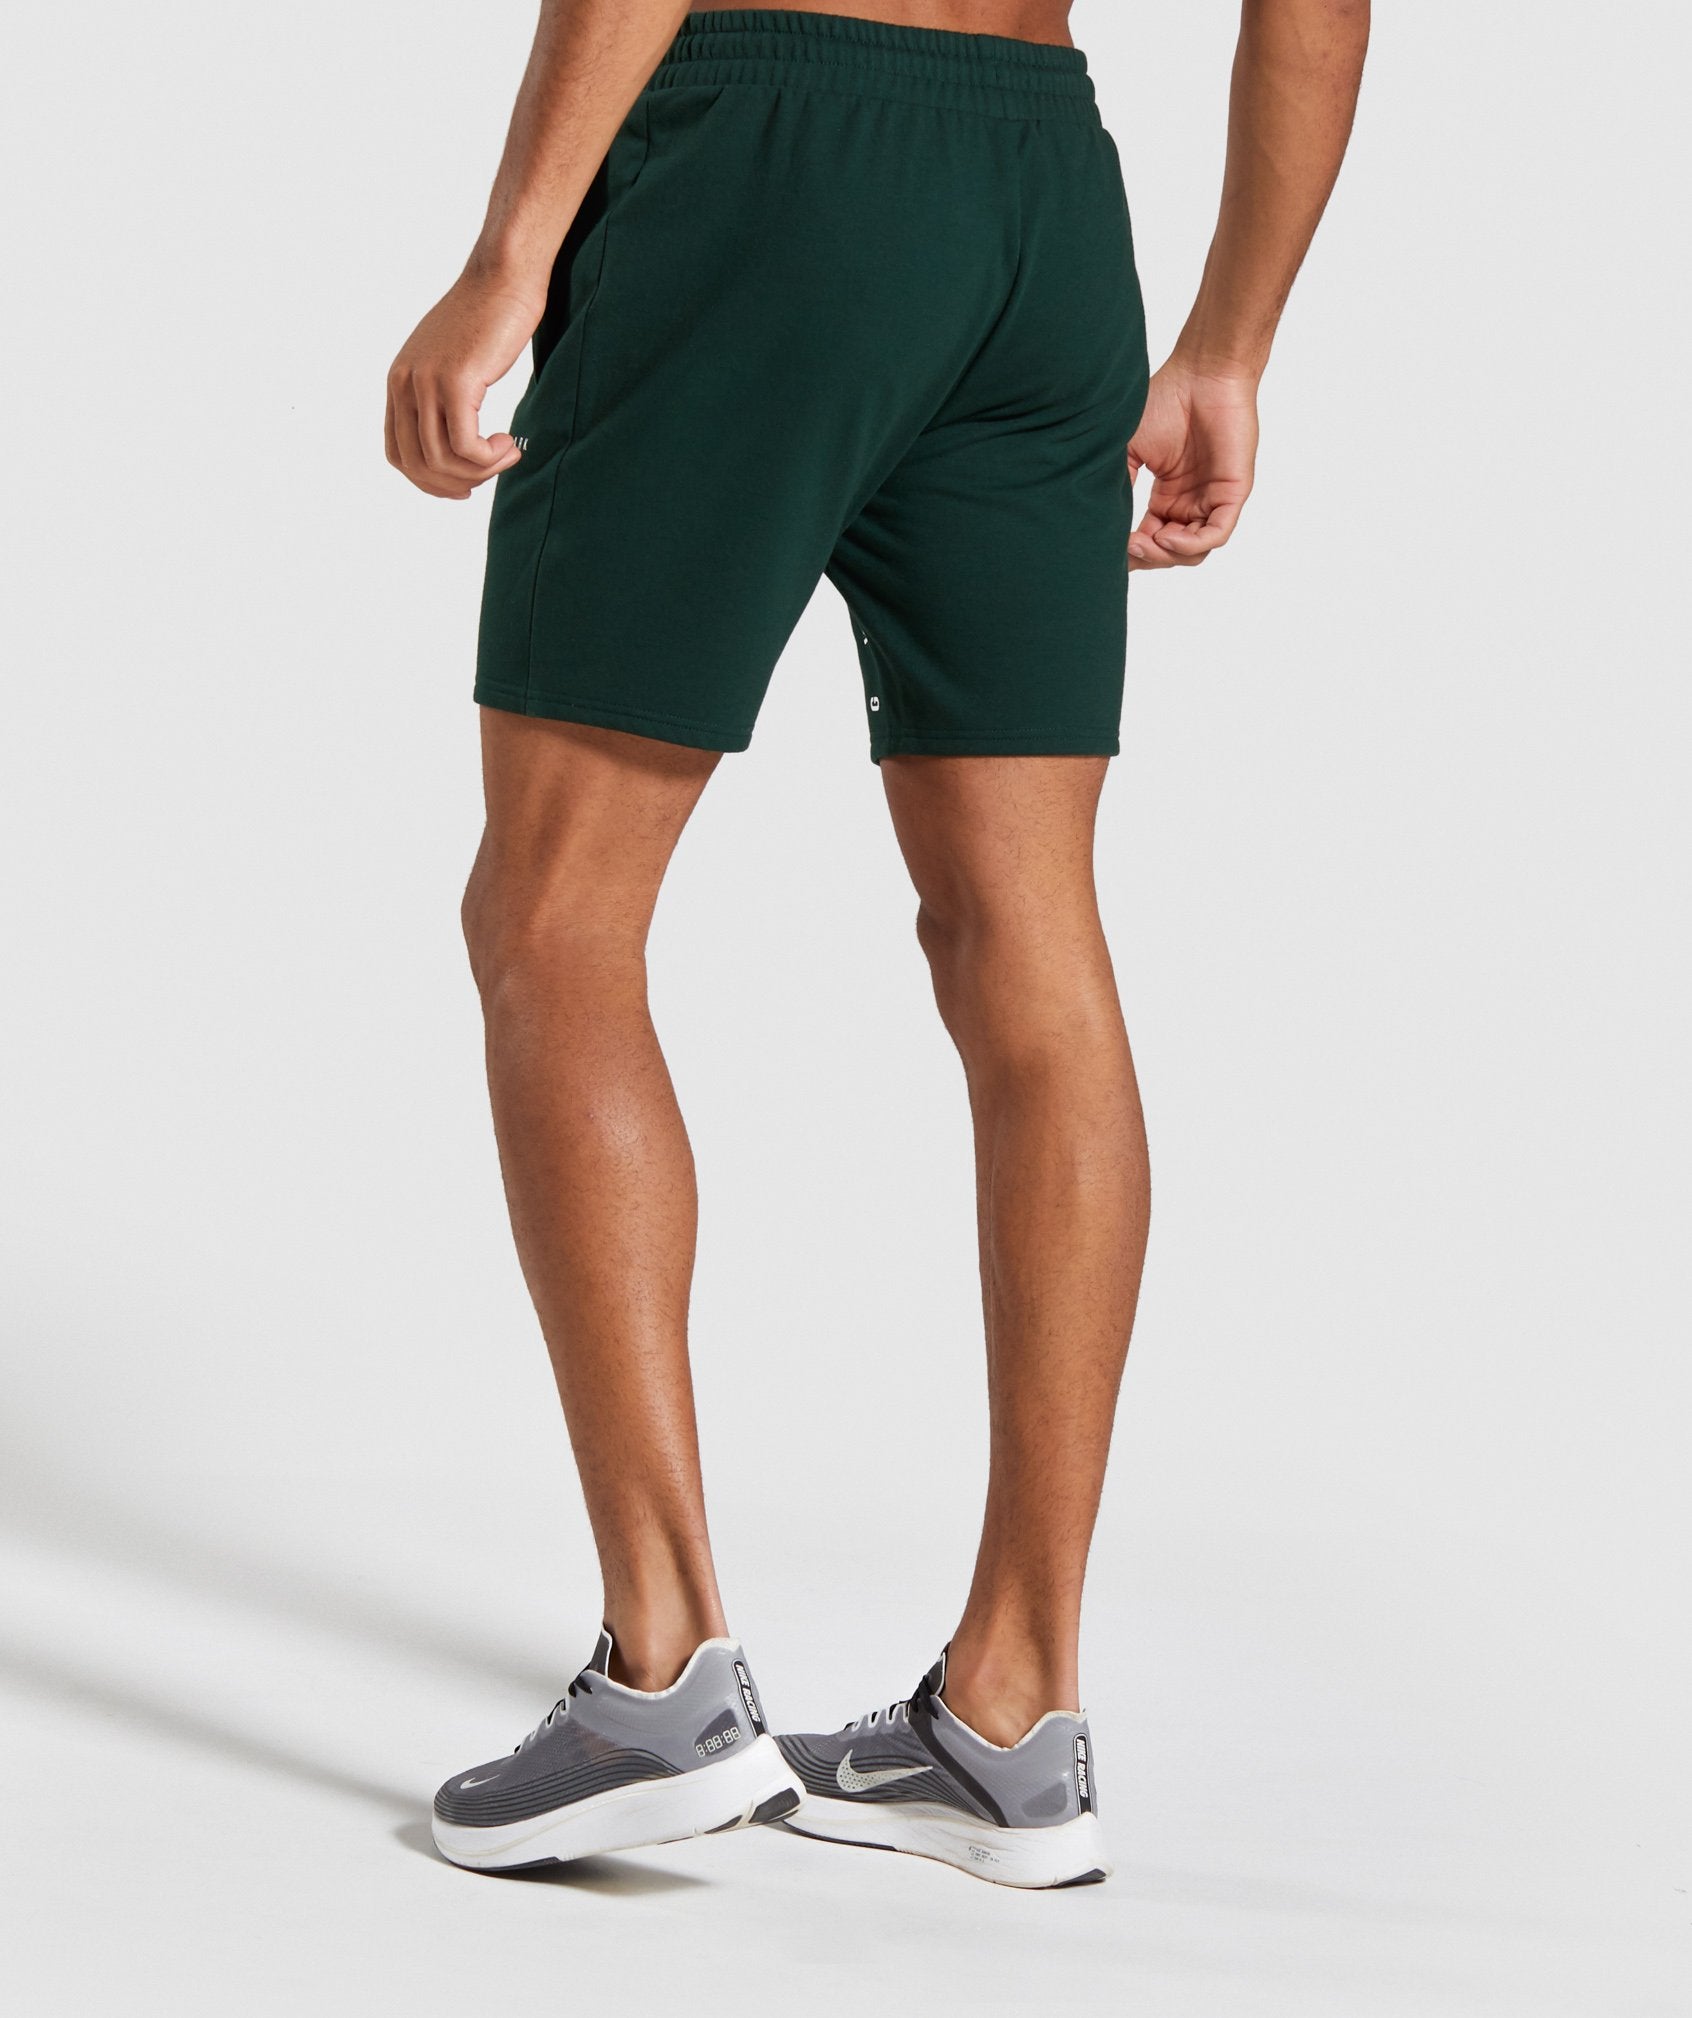 Contrast Shorts in Green - view 2